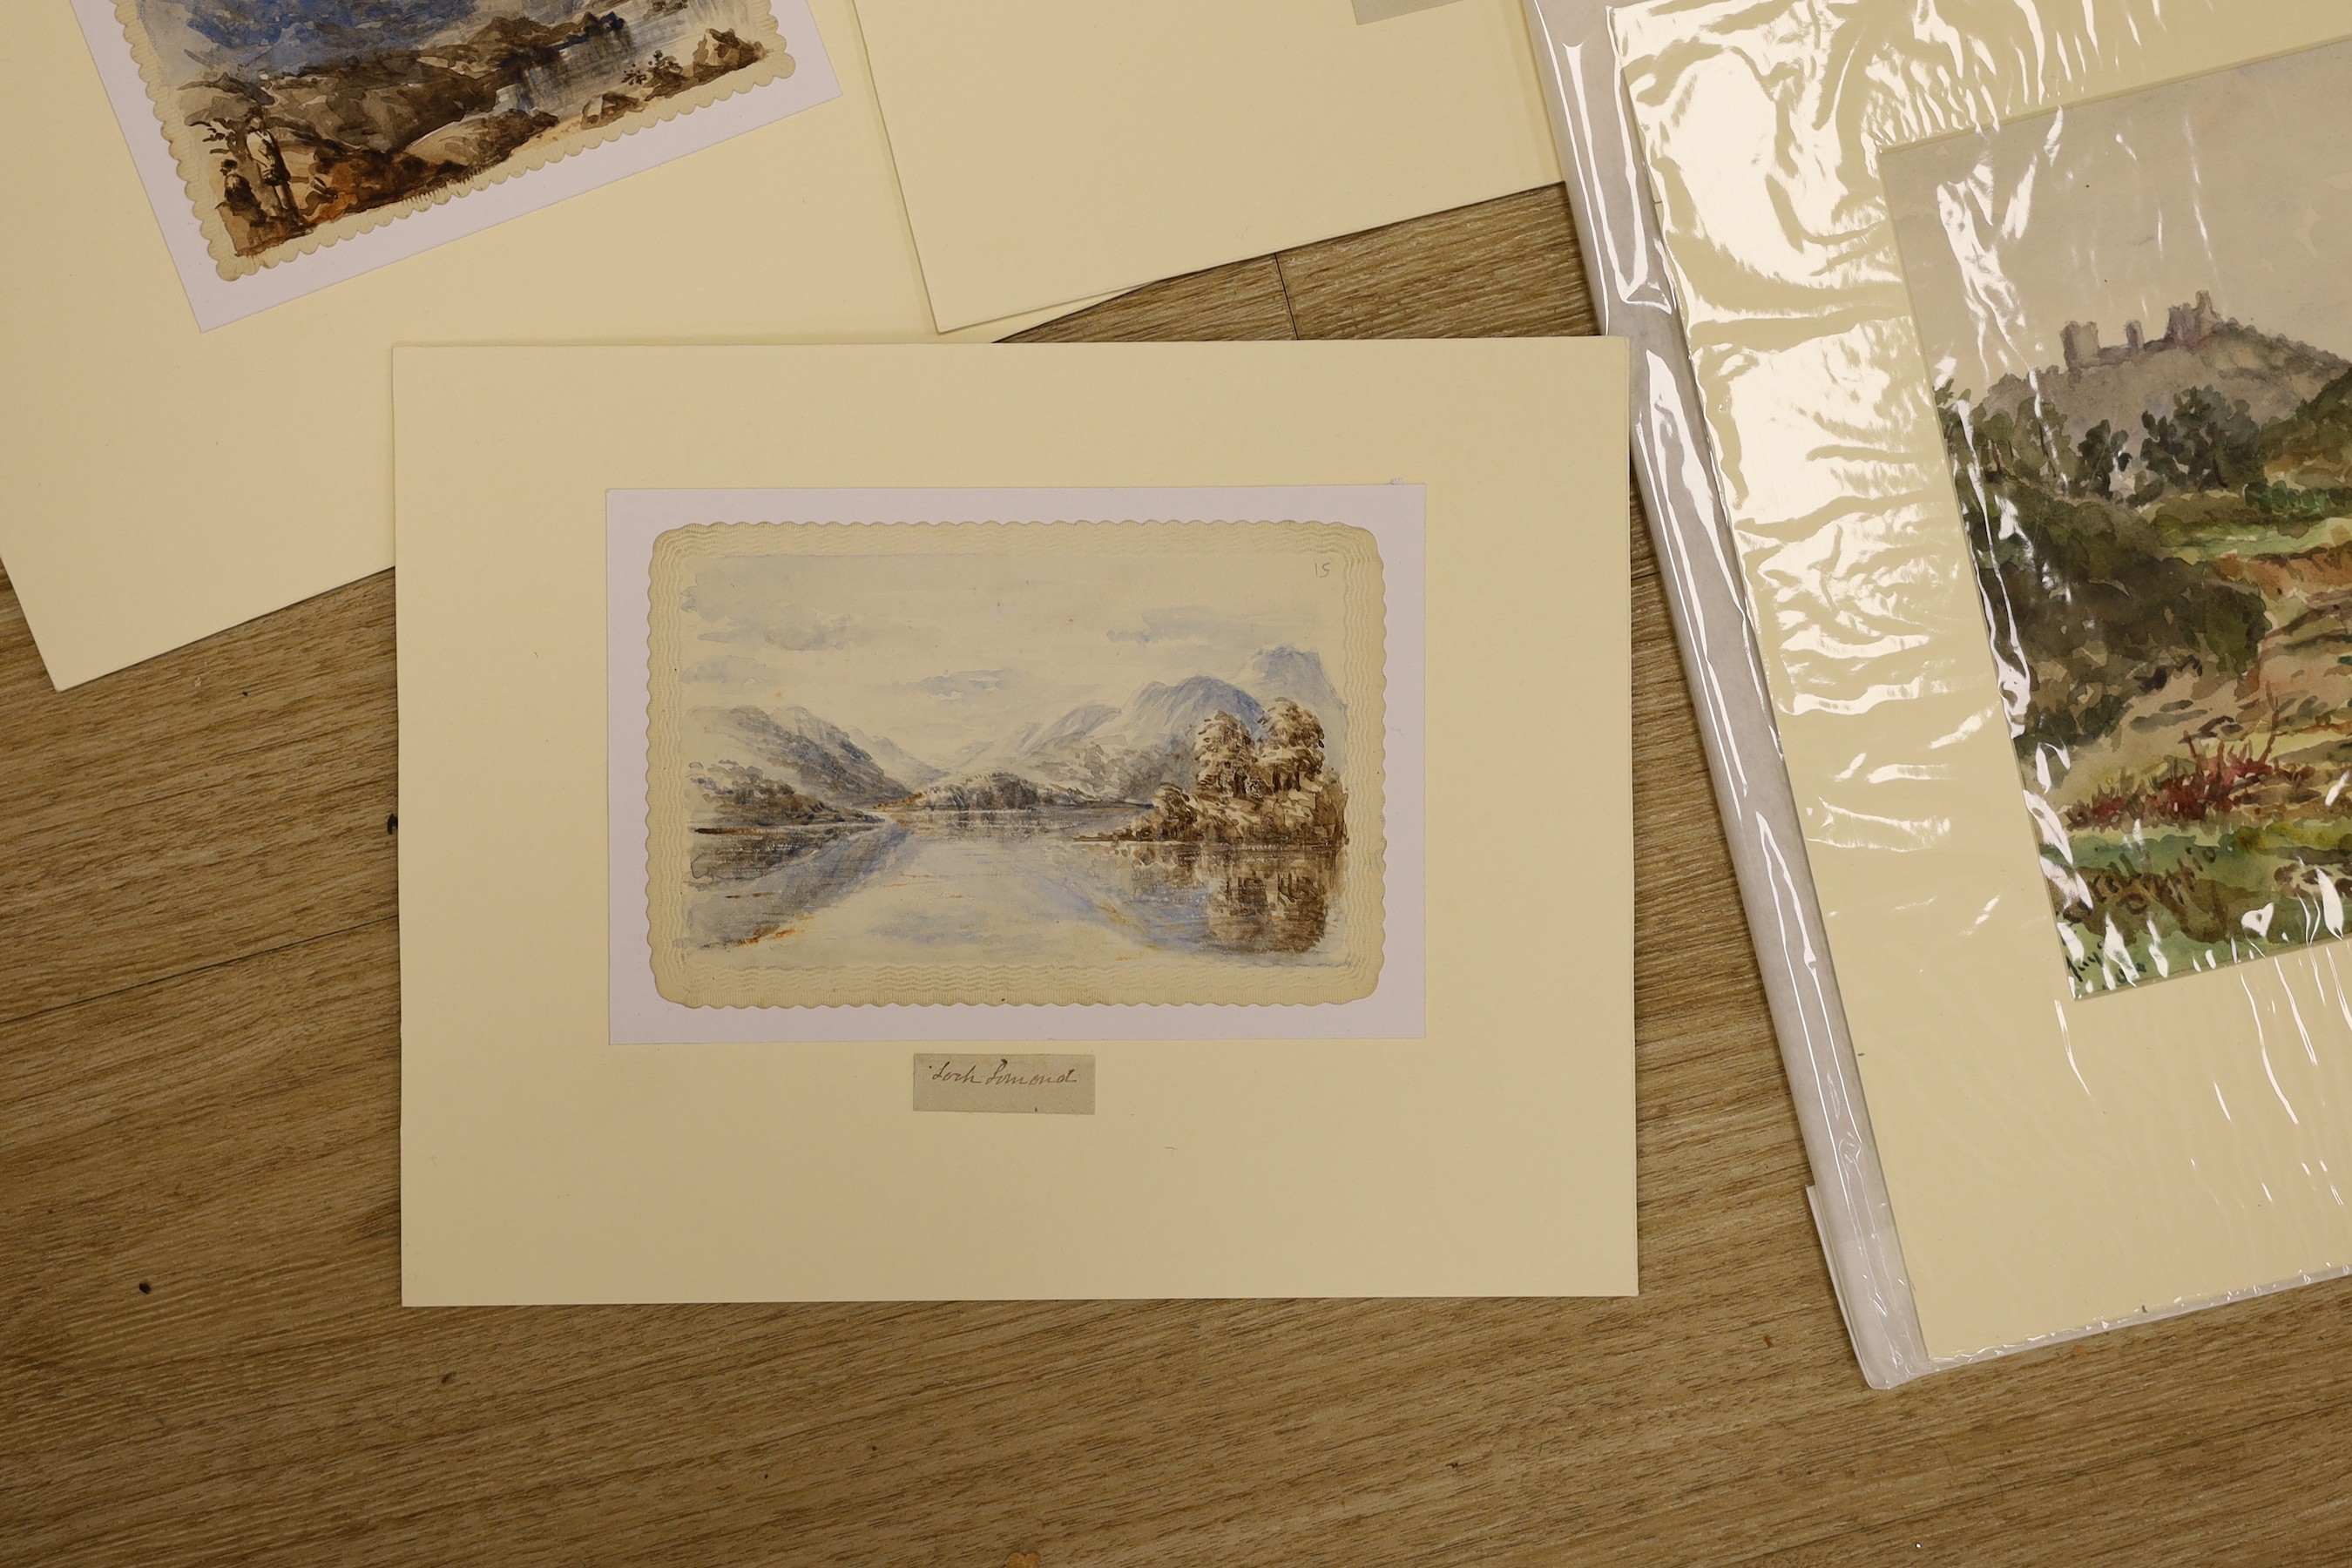 Elizabeth Denston and Robert Hay Drummond, a collection of assorted unframed watercolours, Loch scenes and Views along the Cotes d'Azur, largest 23 x 12cm